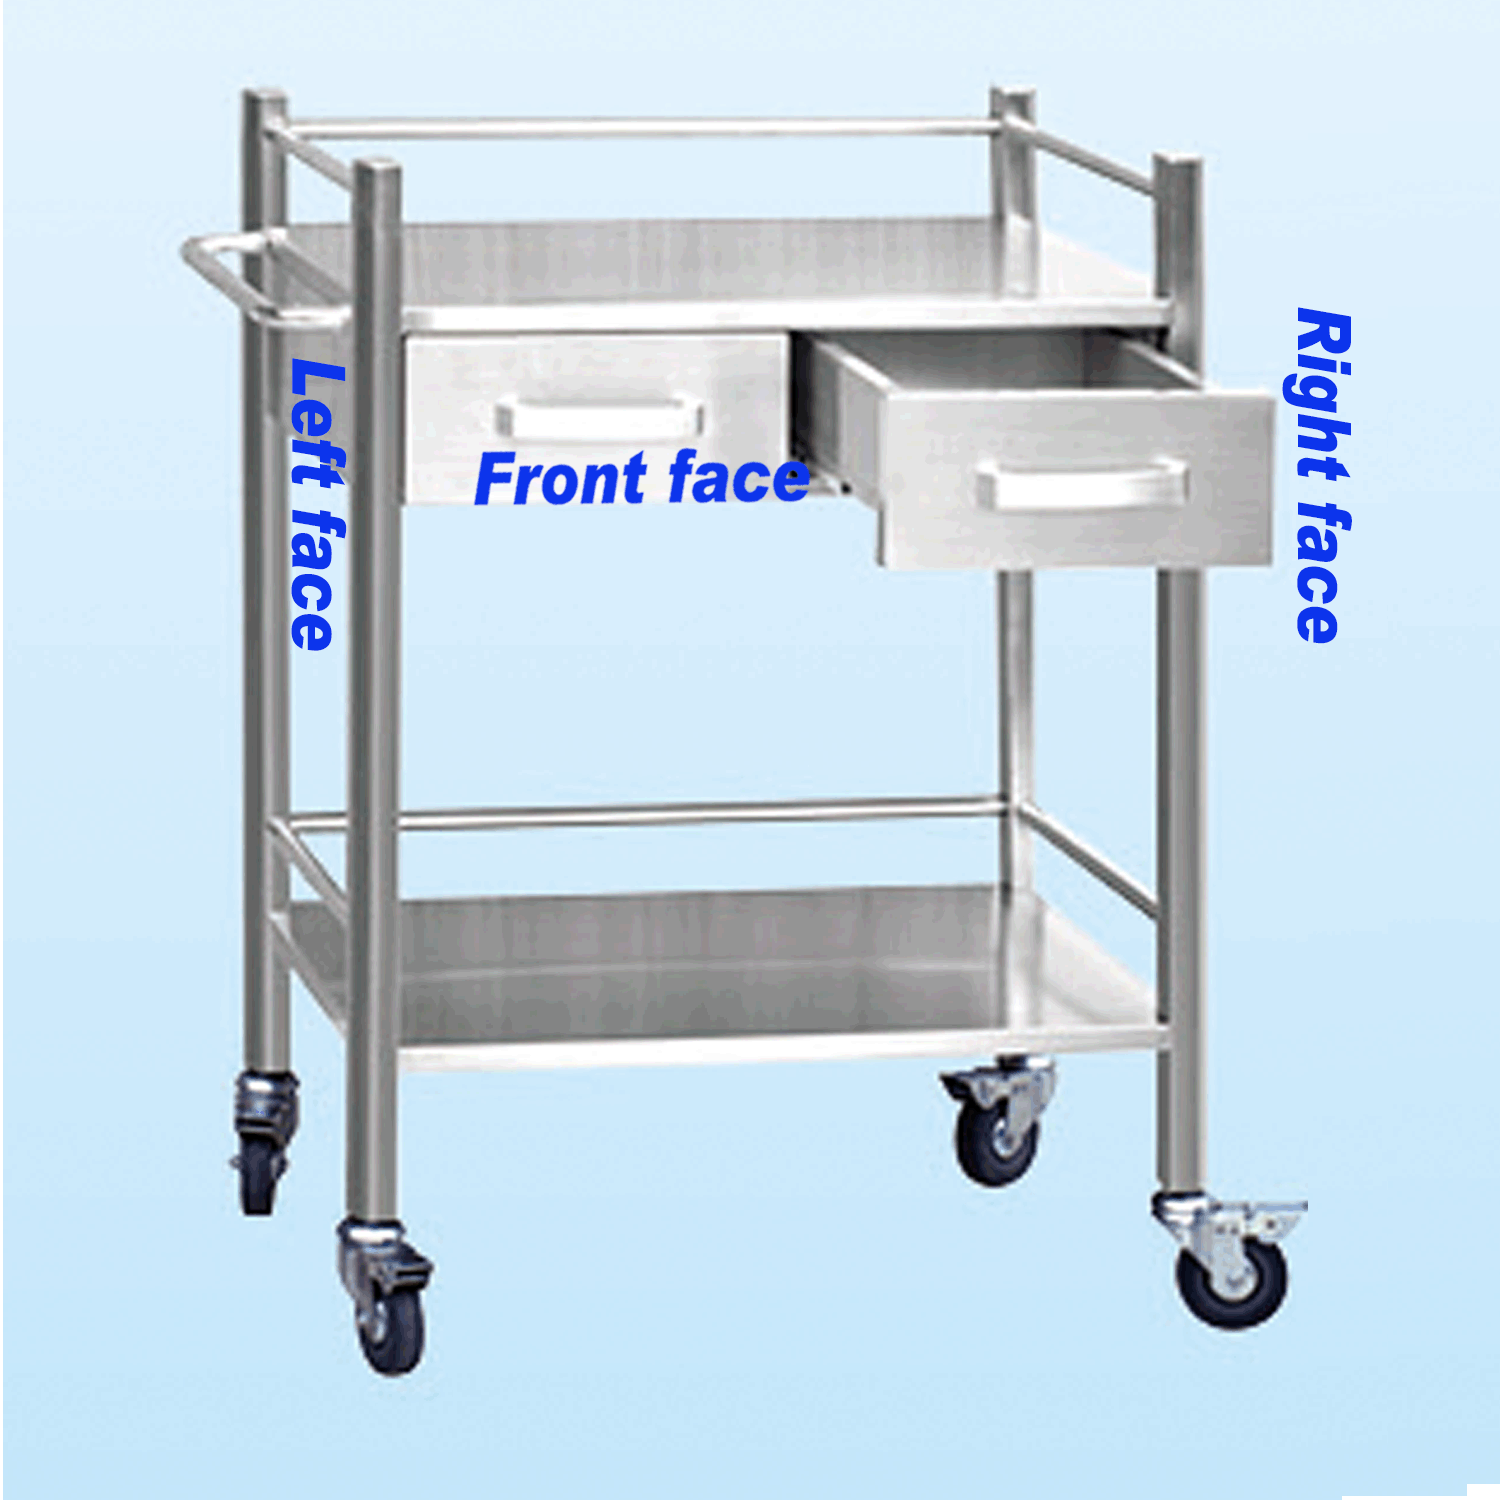 Size : 75×53×98cm ZAQI Extra Large Medical Cart Drawer 3 Shelf White Plastic Commercial Dental Pets Clinic Trolley with Storage Basket Silent Casters 330 Lbs Handle Load 150kg 